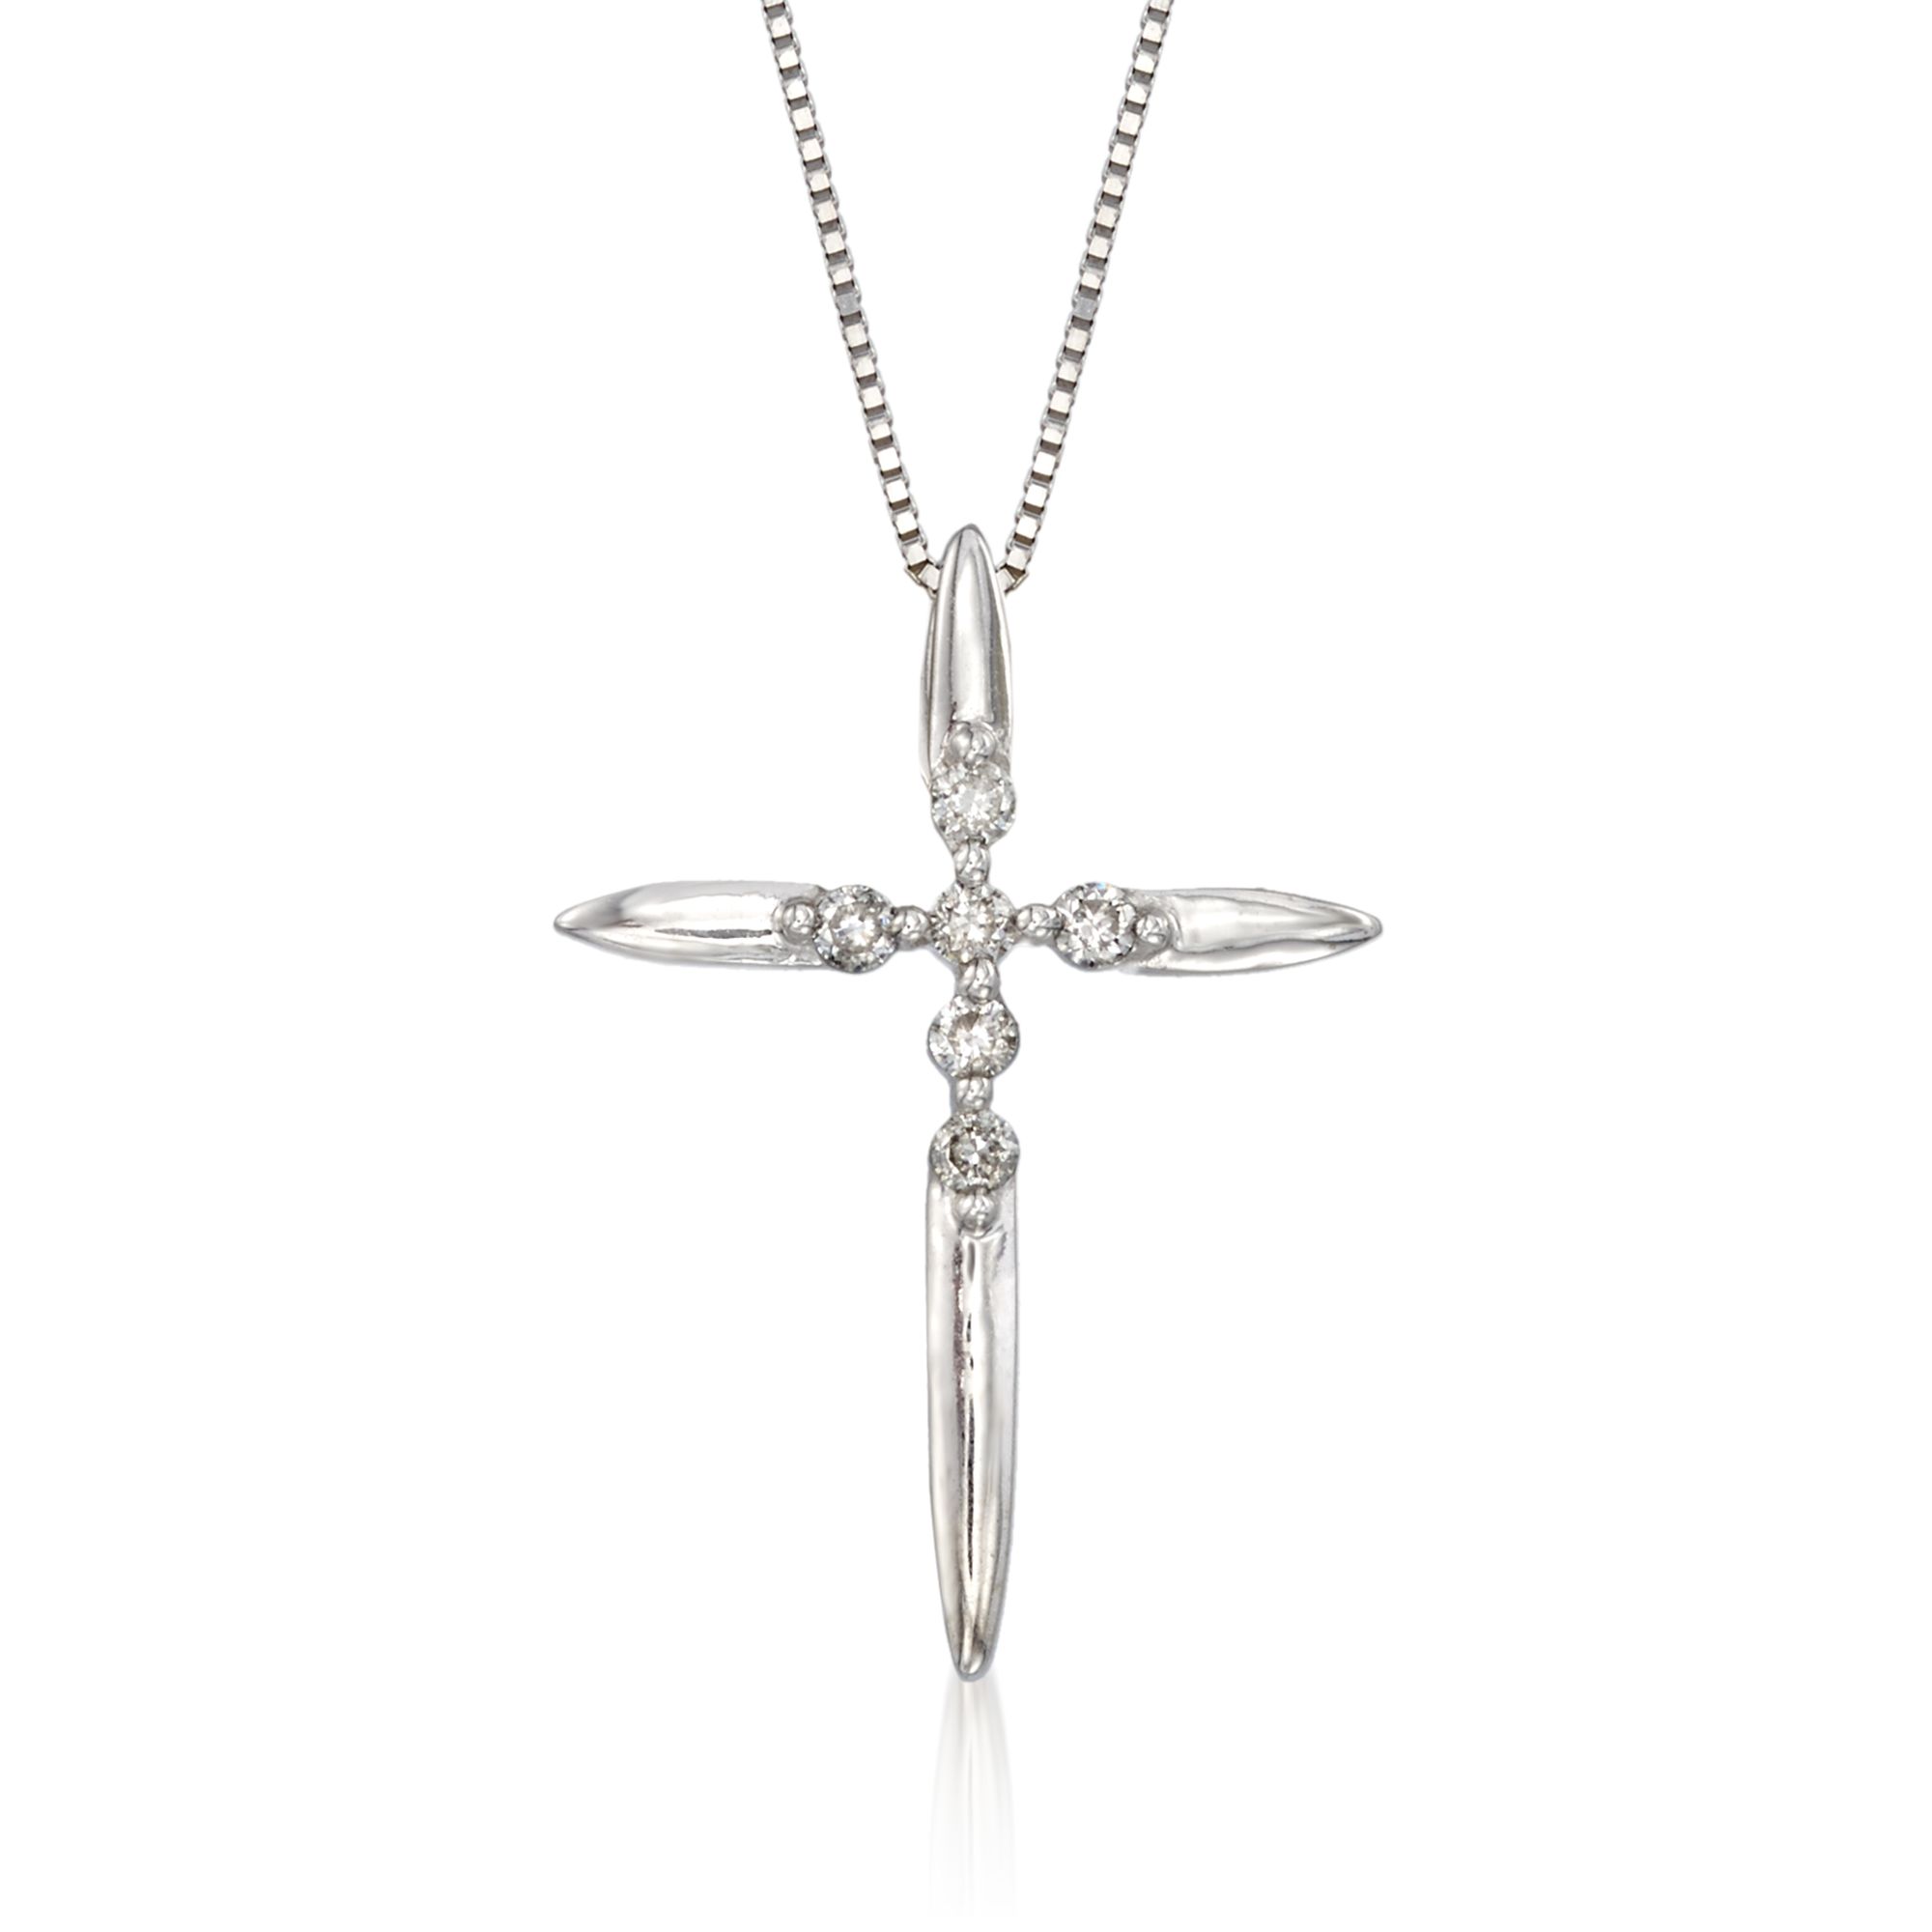 .10 ct. t.w. Diamond Cross Pendant Necklace in 14kt White Gold. 18